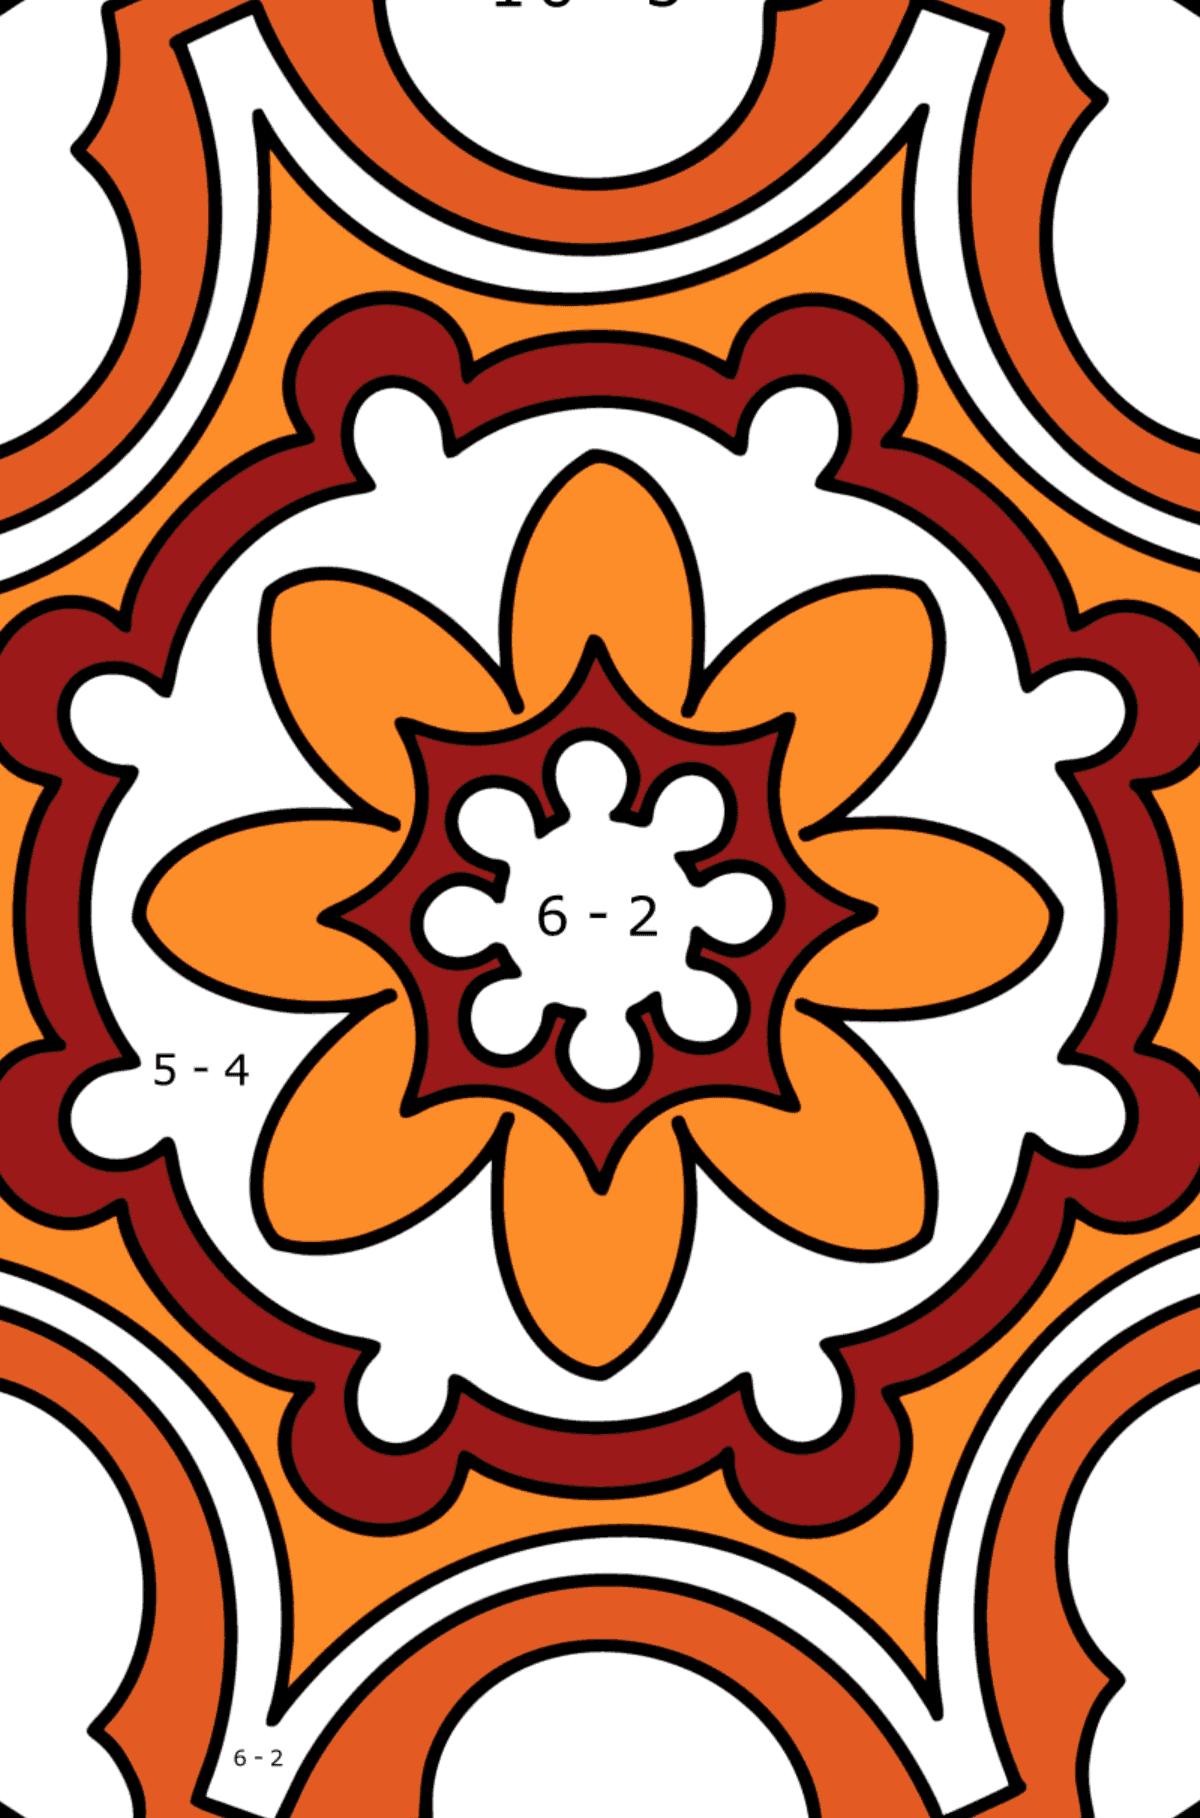 Mandala coloring page - 9 elements - Math Coloring - Subtraction for Kids